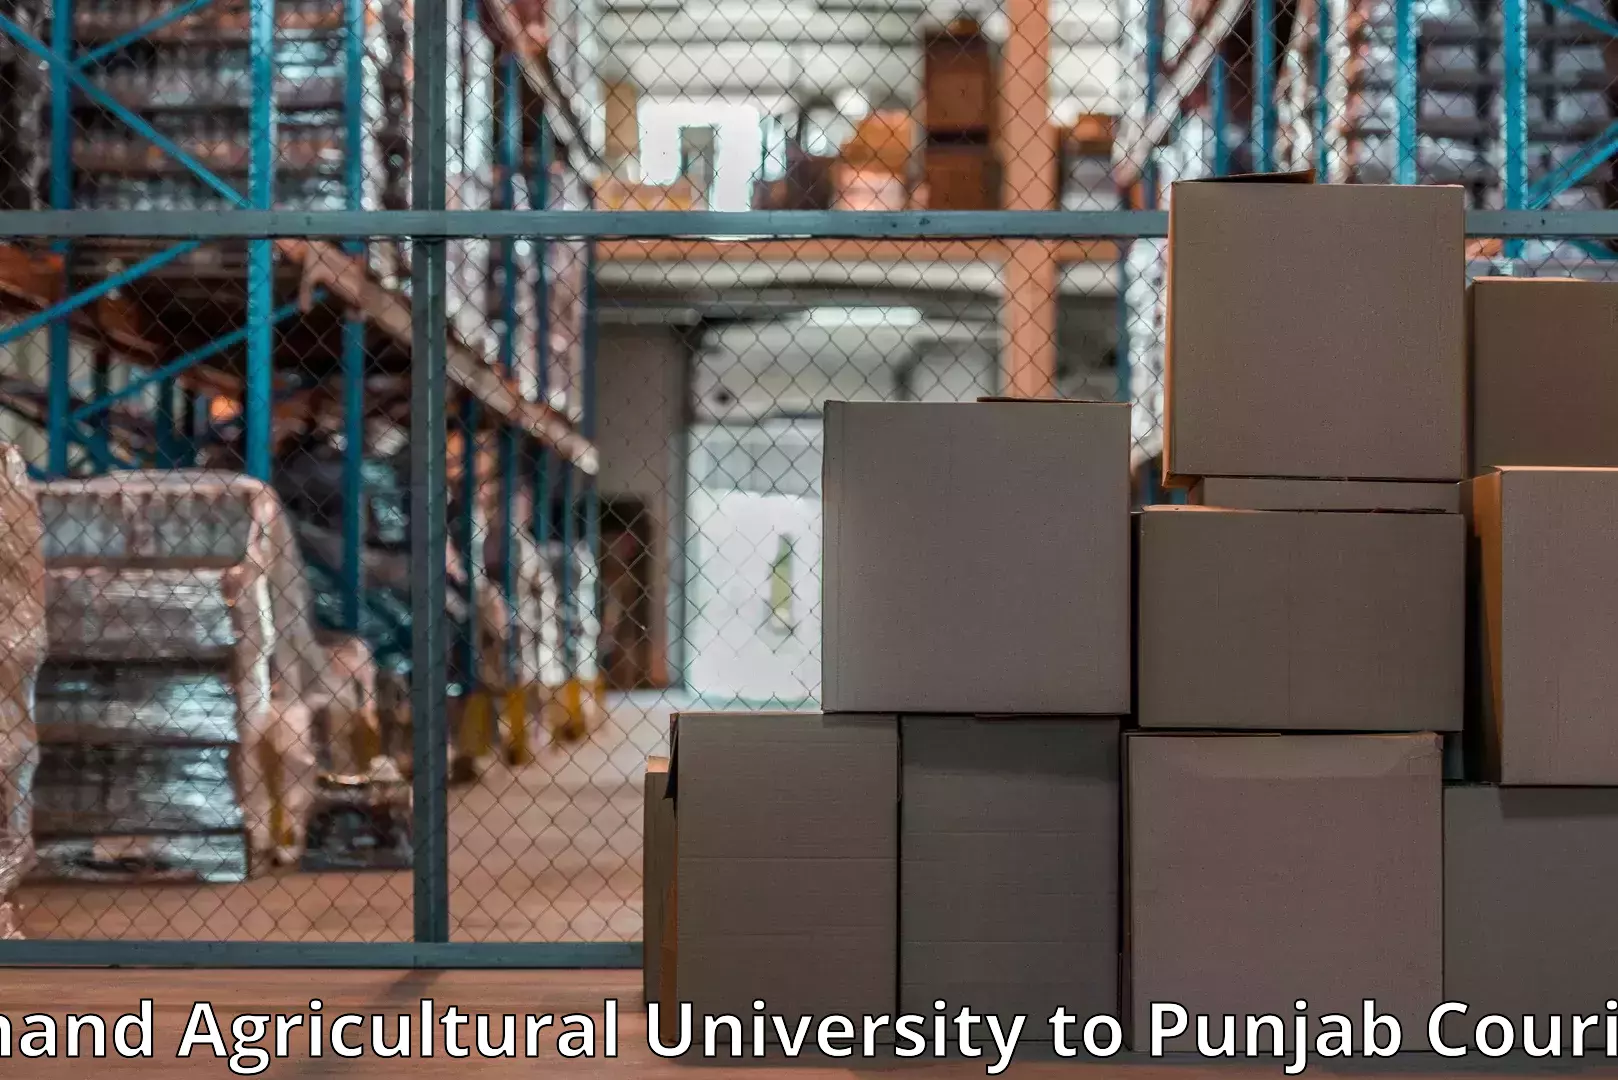 Expert household relocation Anand Agricultural University to Punjab